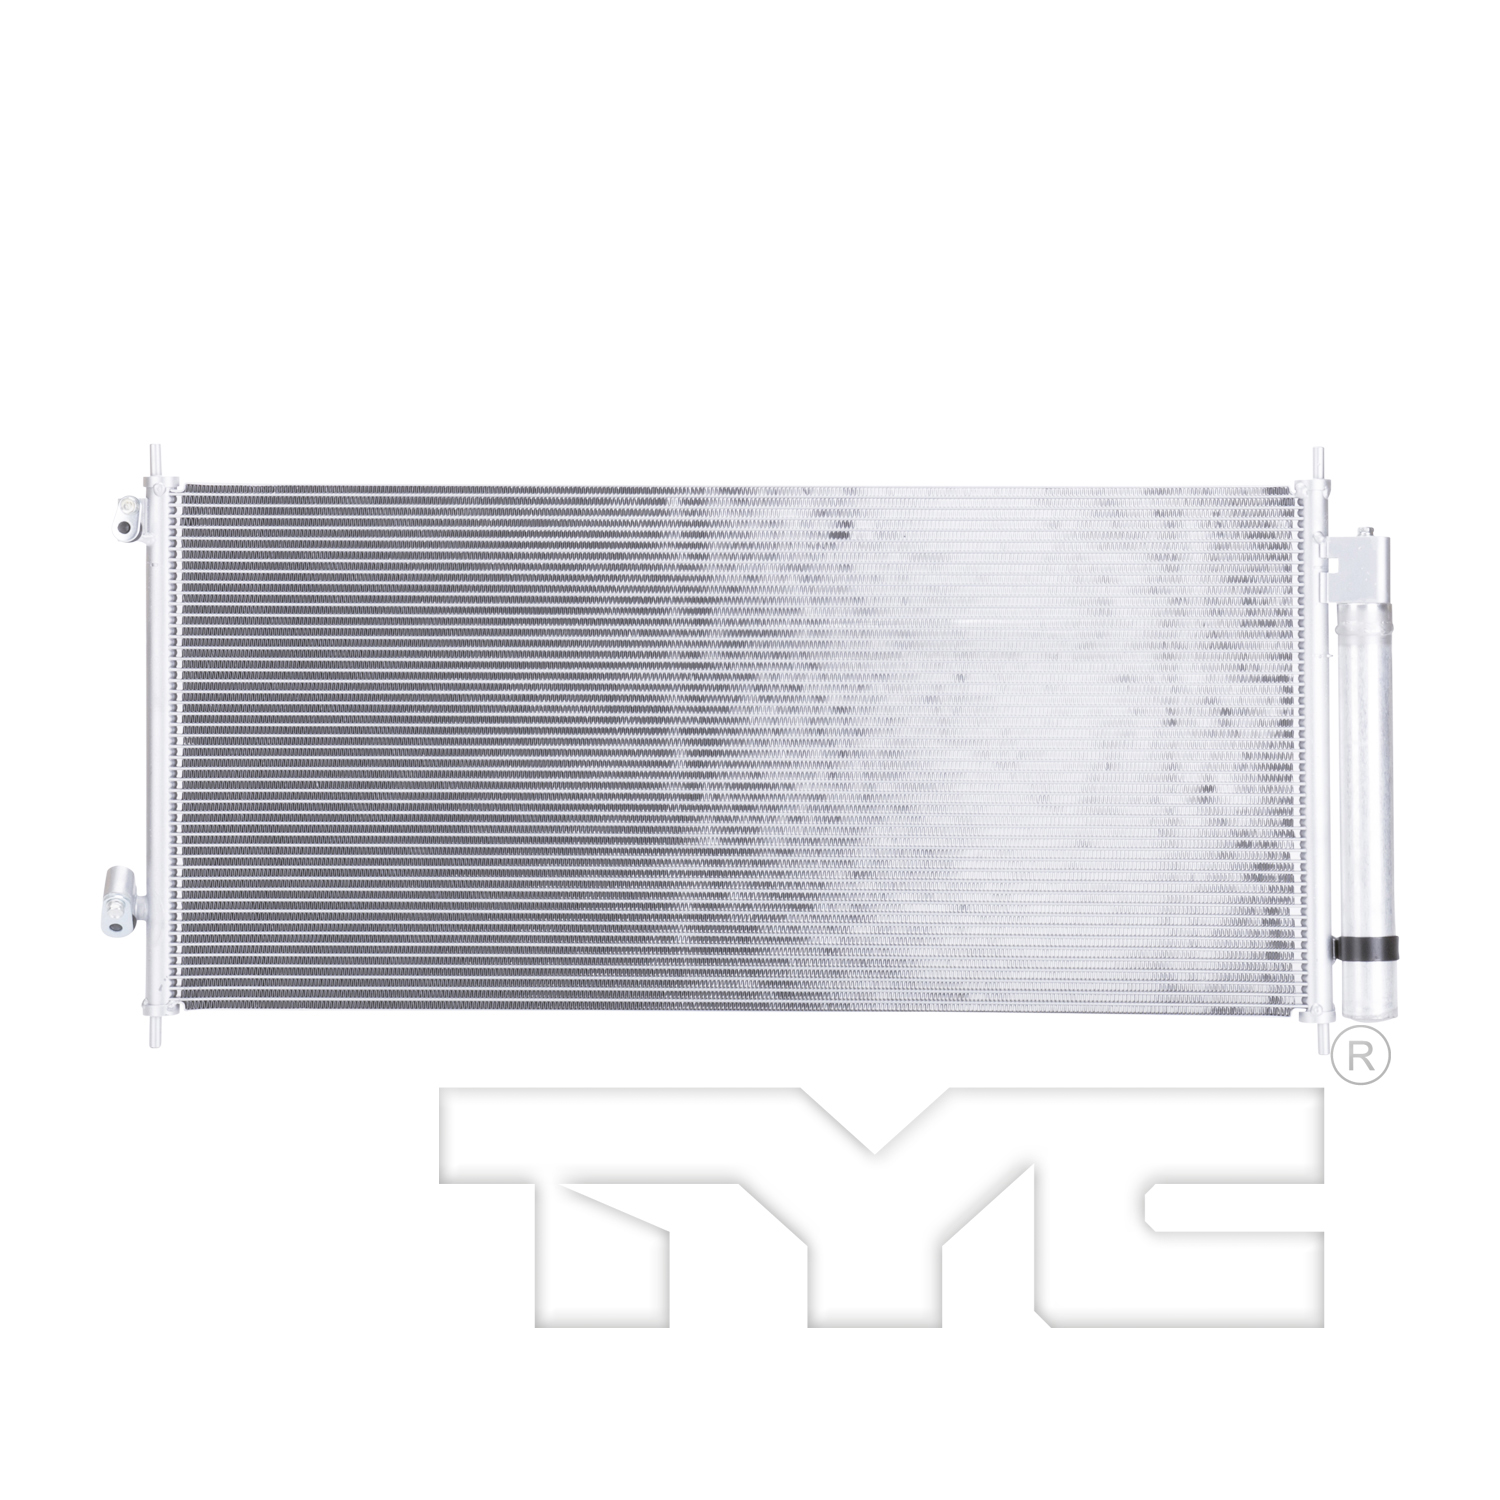 Aftermarket AC CONDENSERS for HONDA - FIT, FIT,09-14,Air conditioning condenser